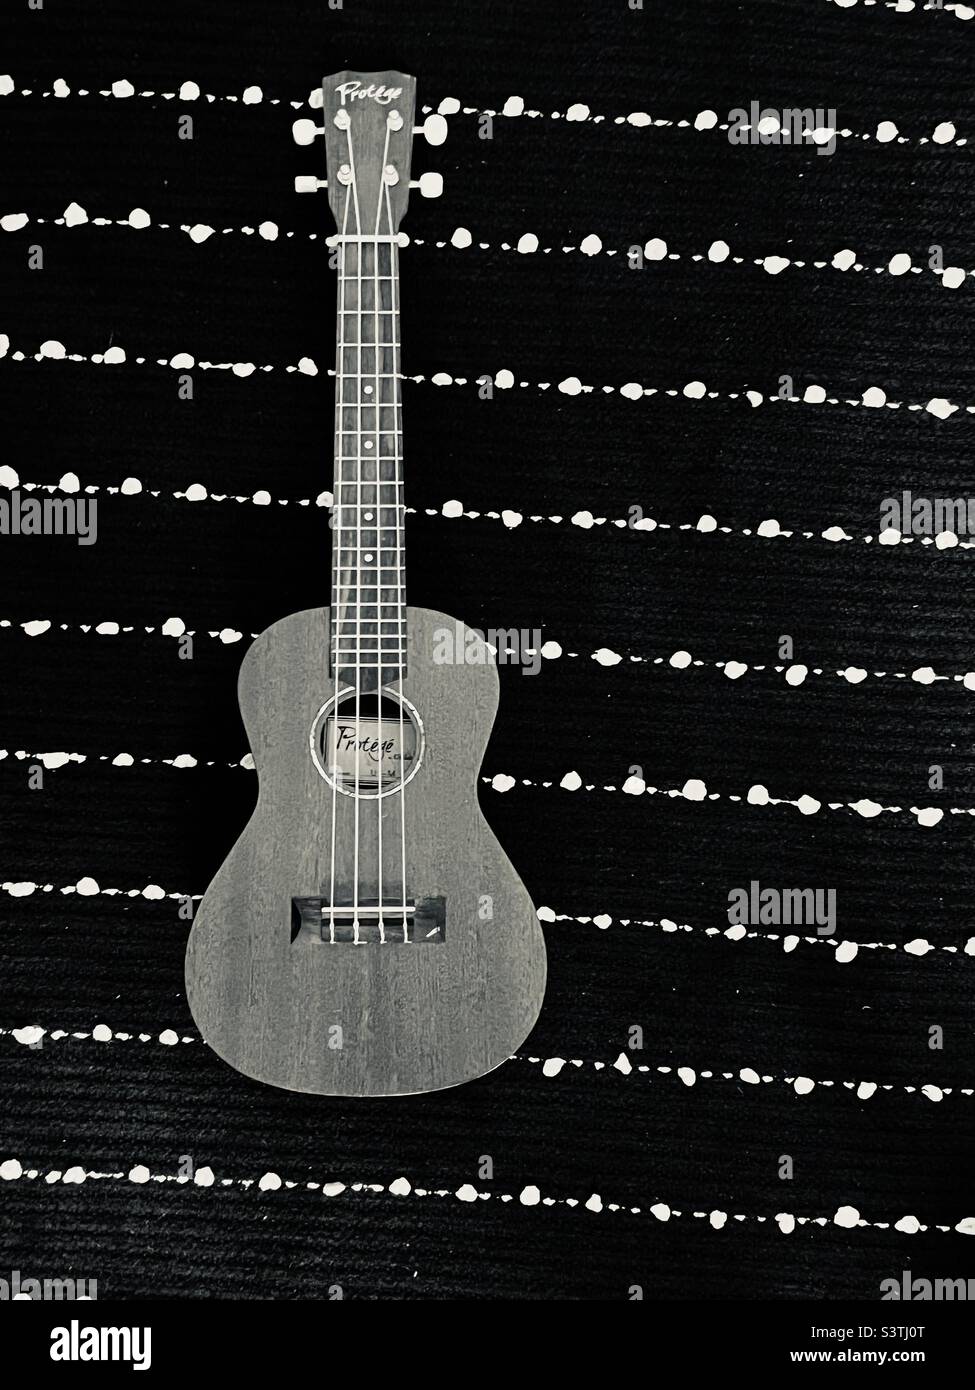 Guitar displayed on a black and white background Stock Photo